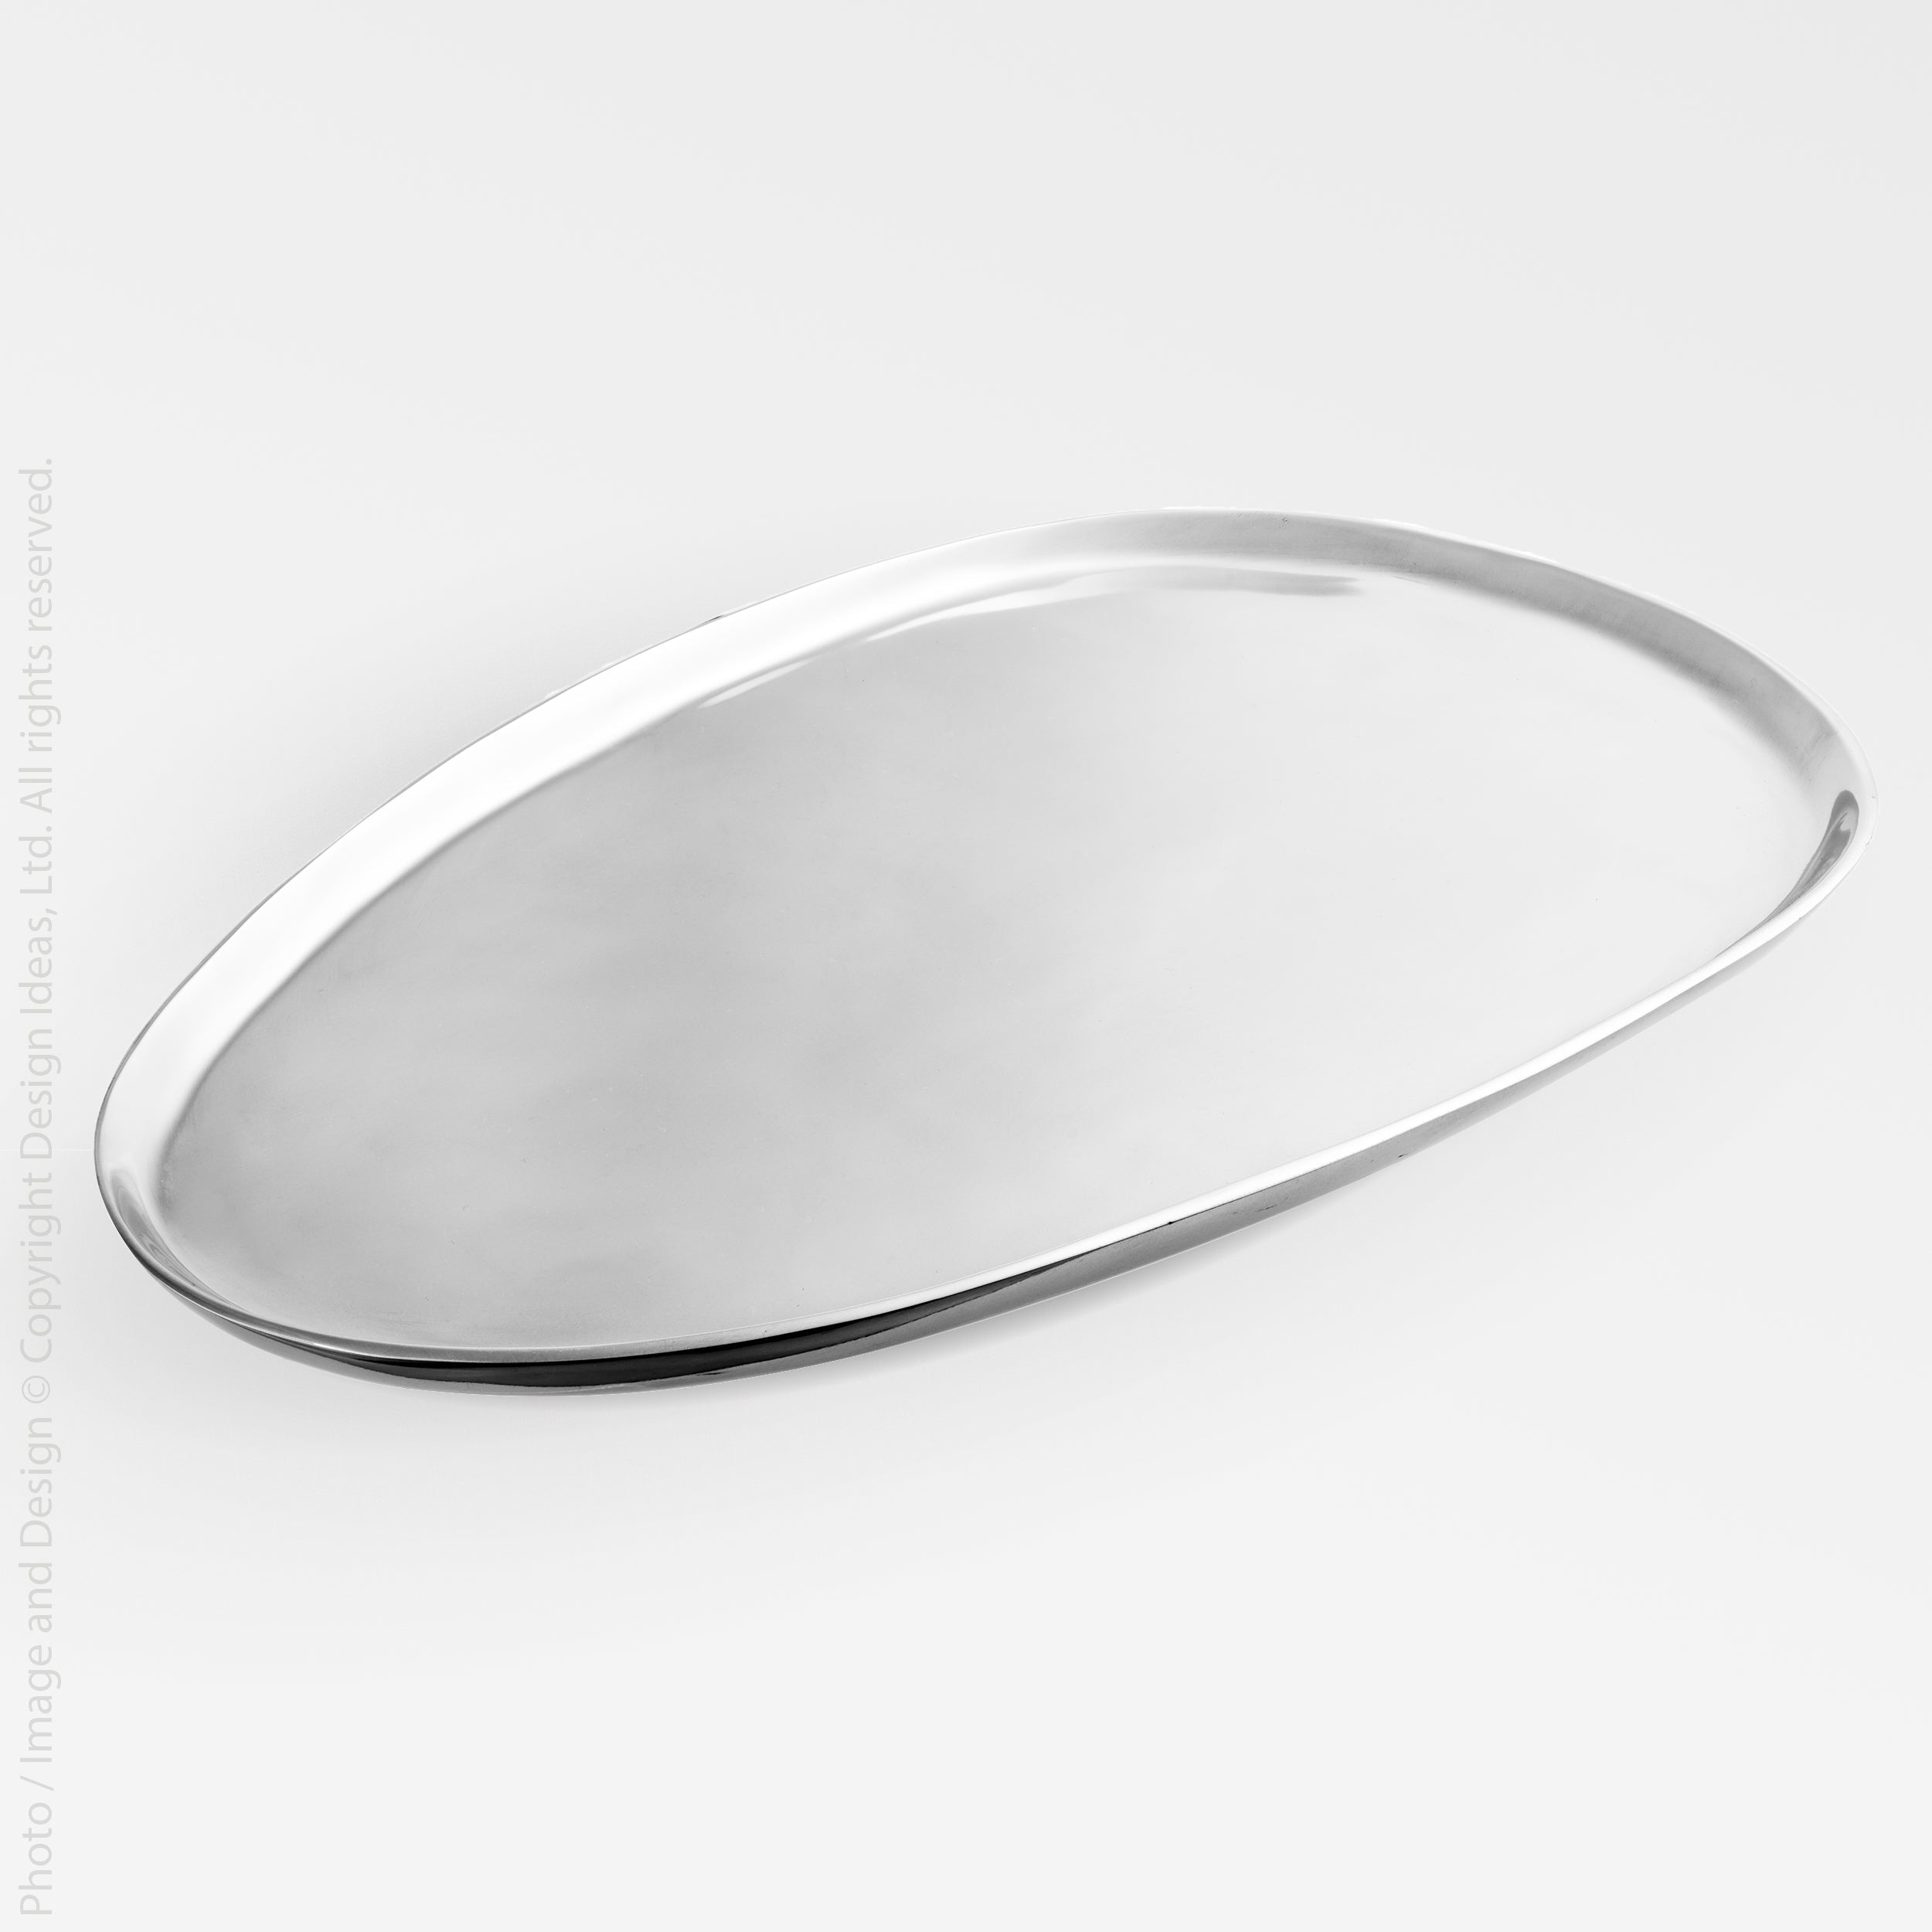 Aluna Aluminum Tray (Large) - Silver Color | Image 1 | From the Aluna Collection | Exquisitely crafted with natural aluminum for long lasting use | Available in natural color | texxture home